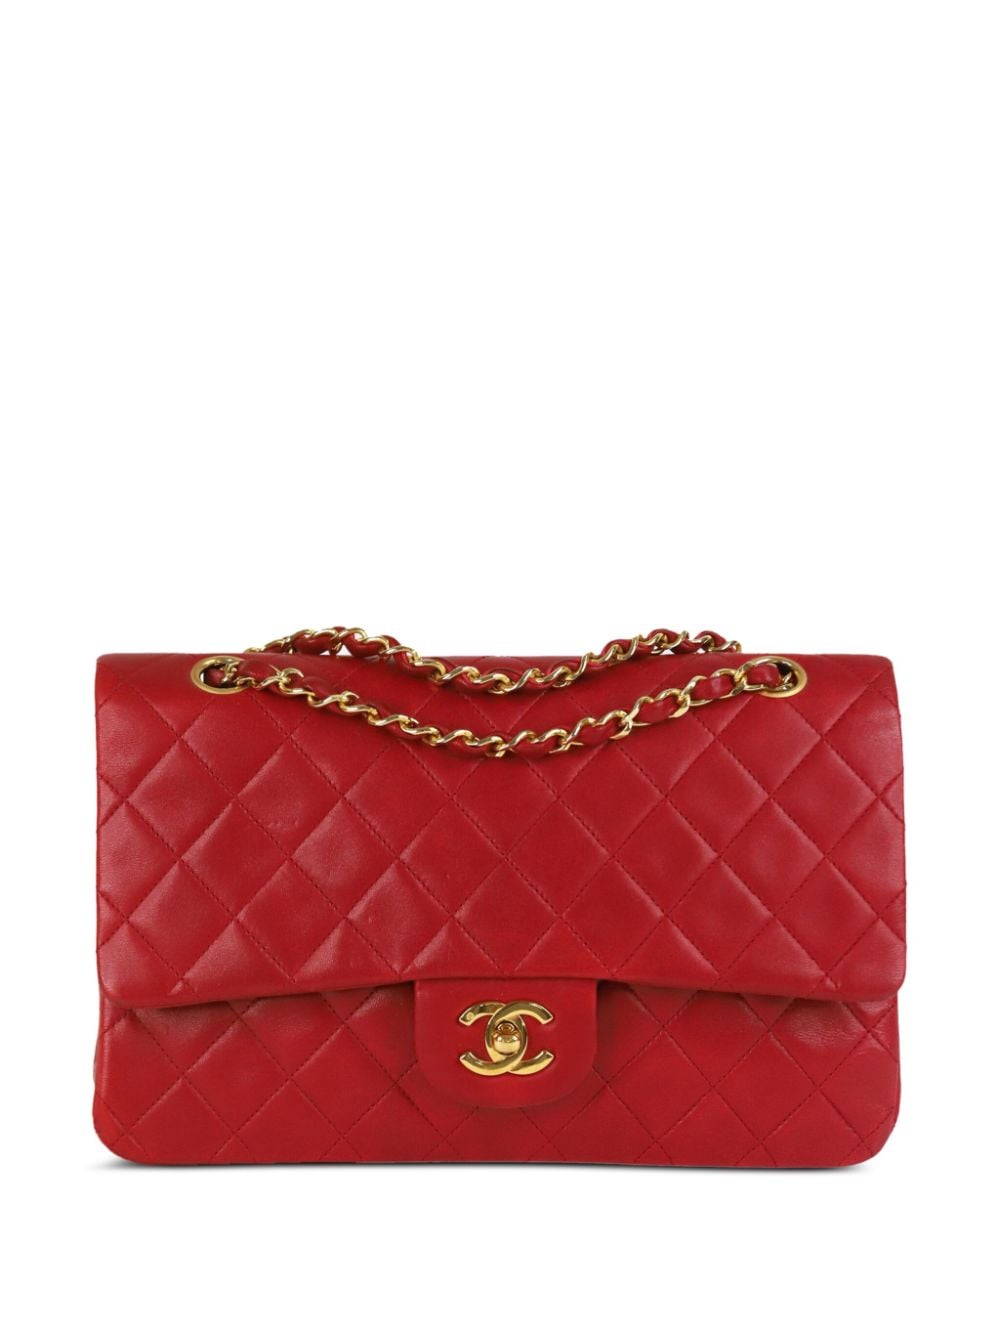 CHANEL Pre-Owned 1989-1991 Classic double flap shoulder bag - Rosso